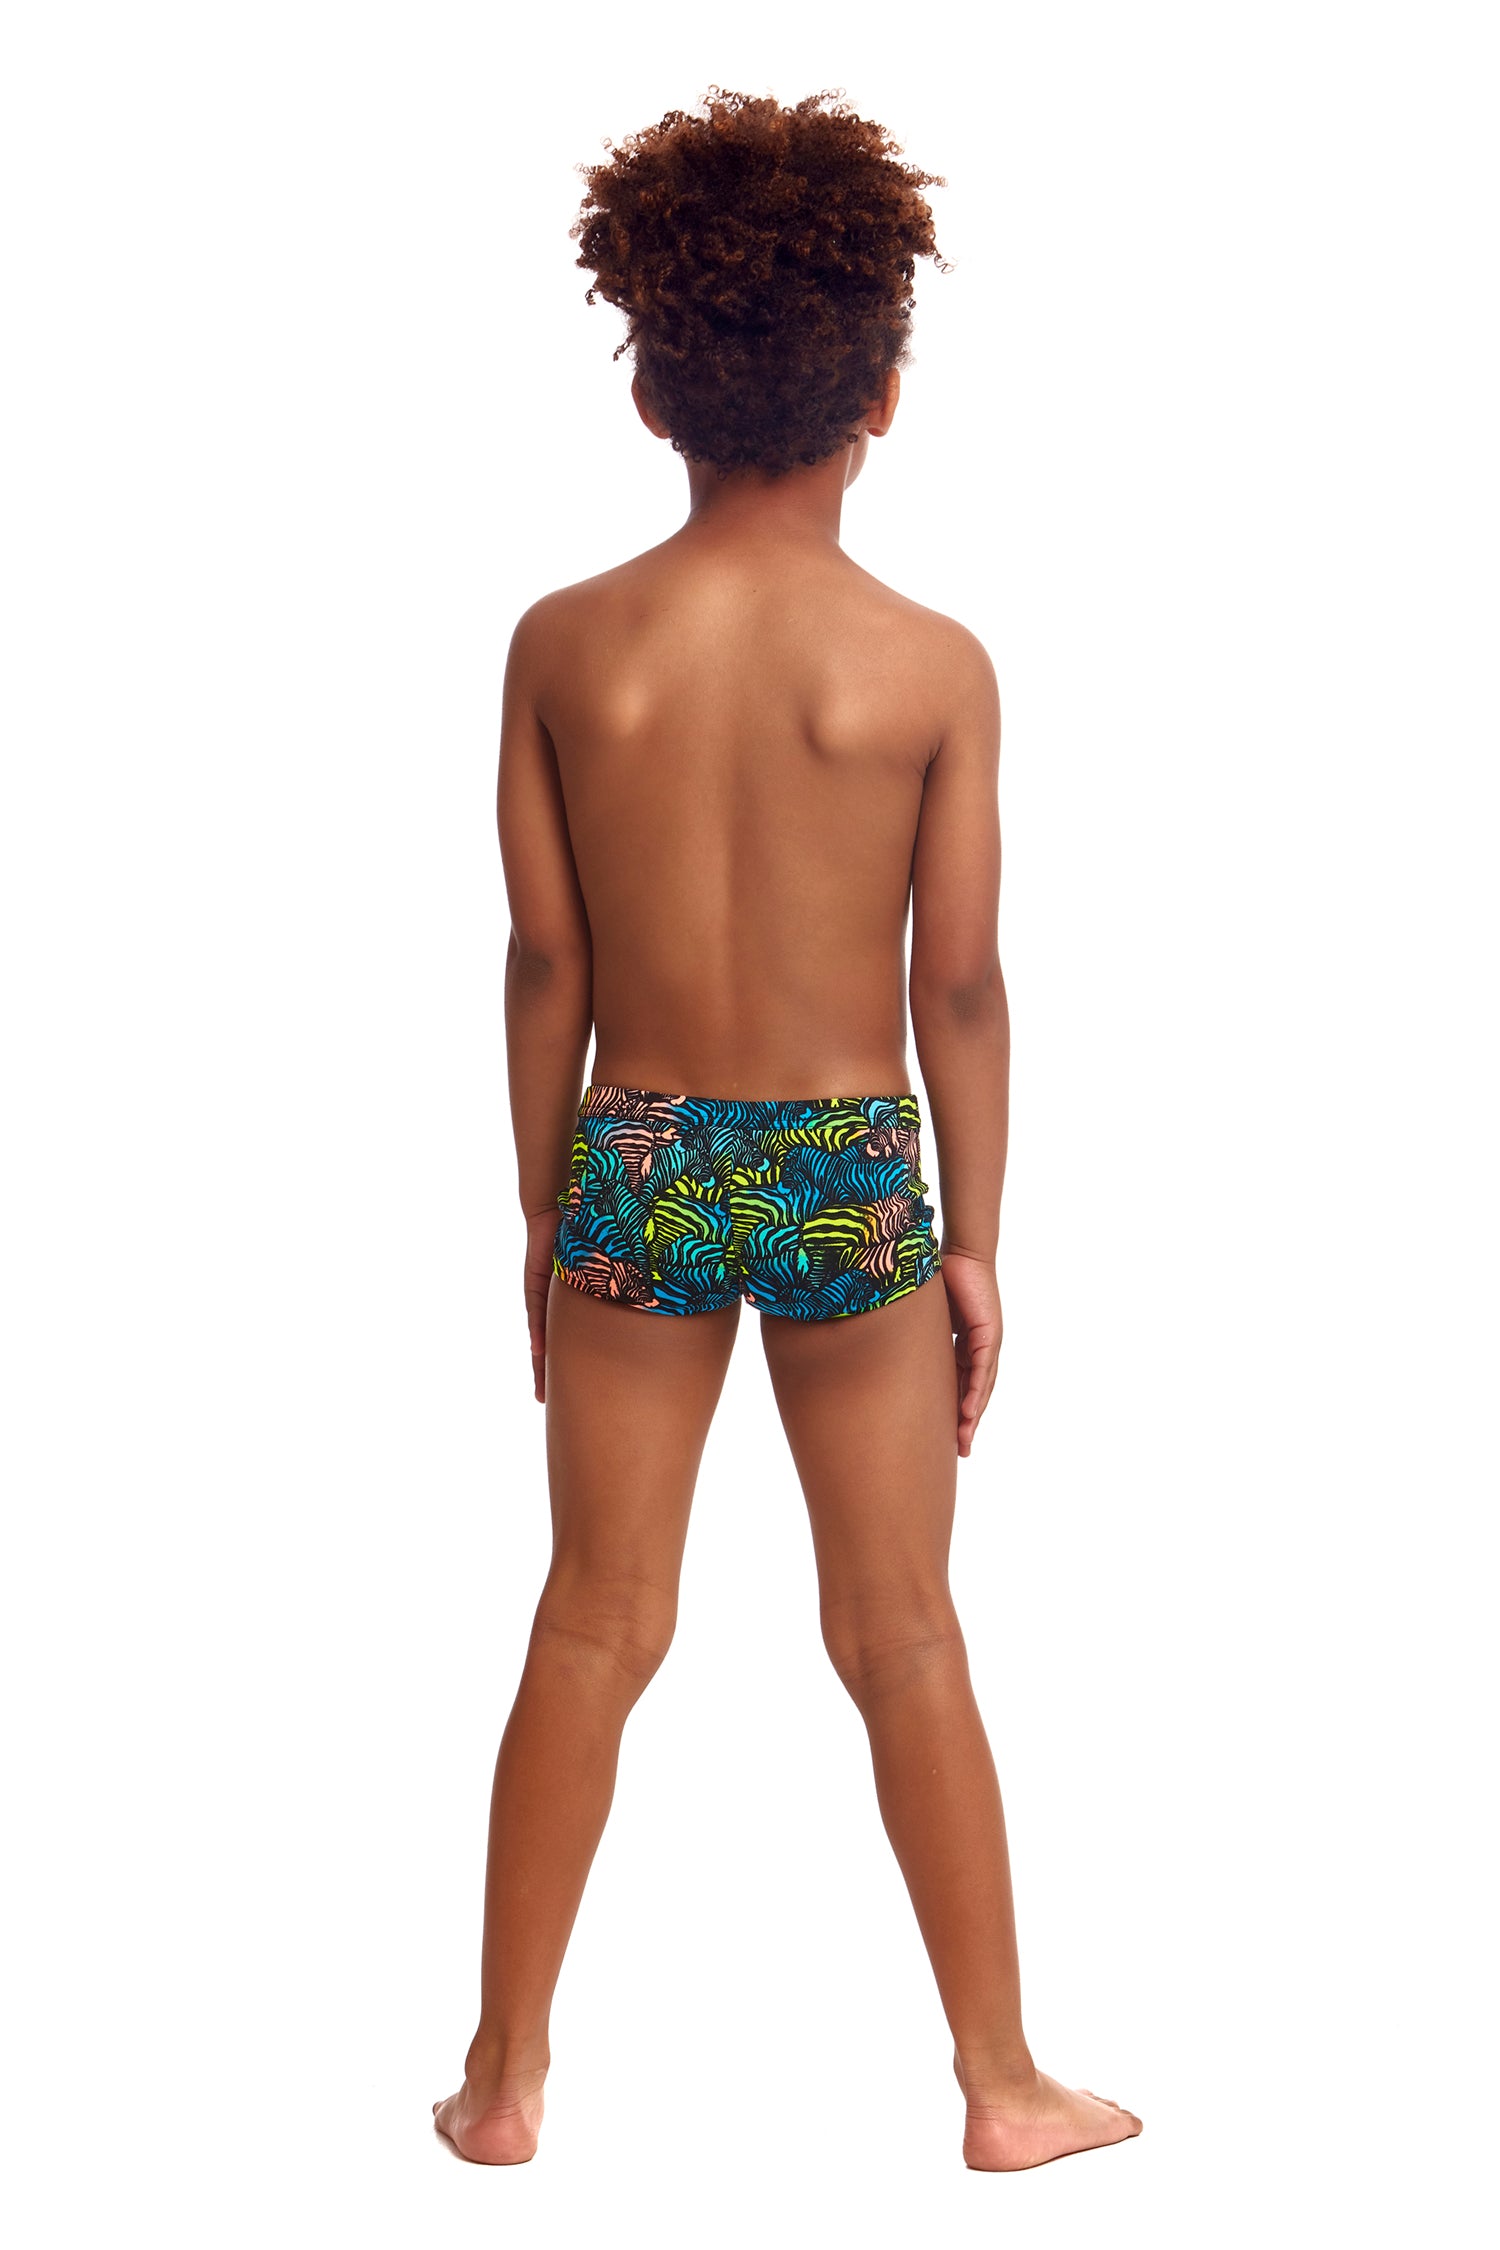 Way Funky, Funky Trunks, Toddler Boys Eco Square Trunks Colour Run, Badehose, Kinder